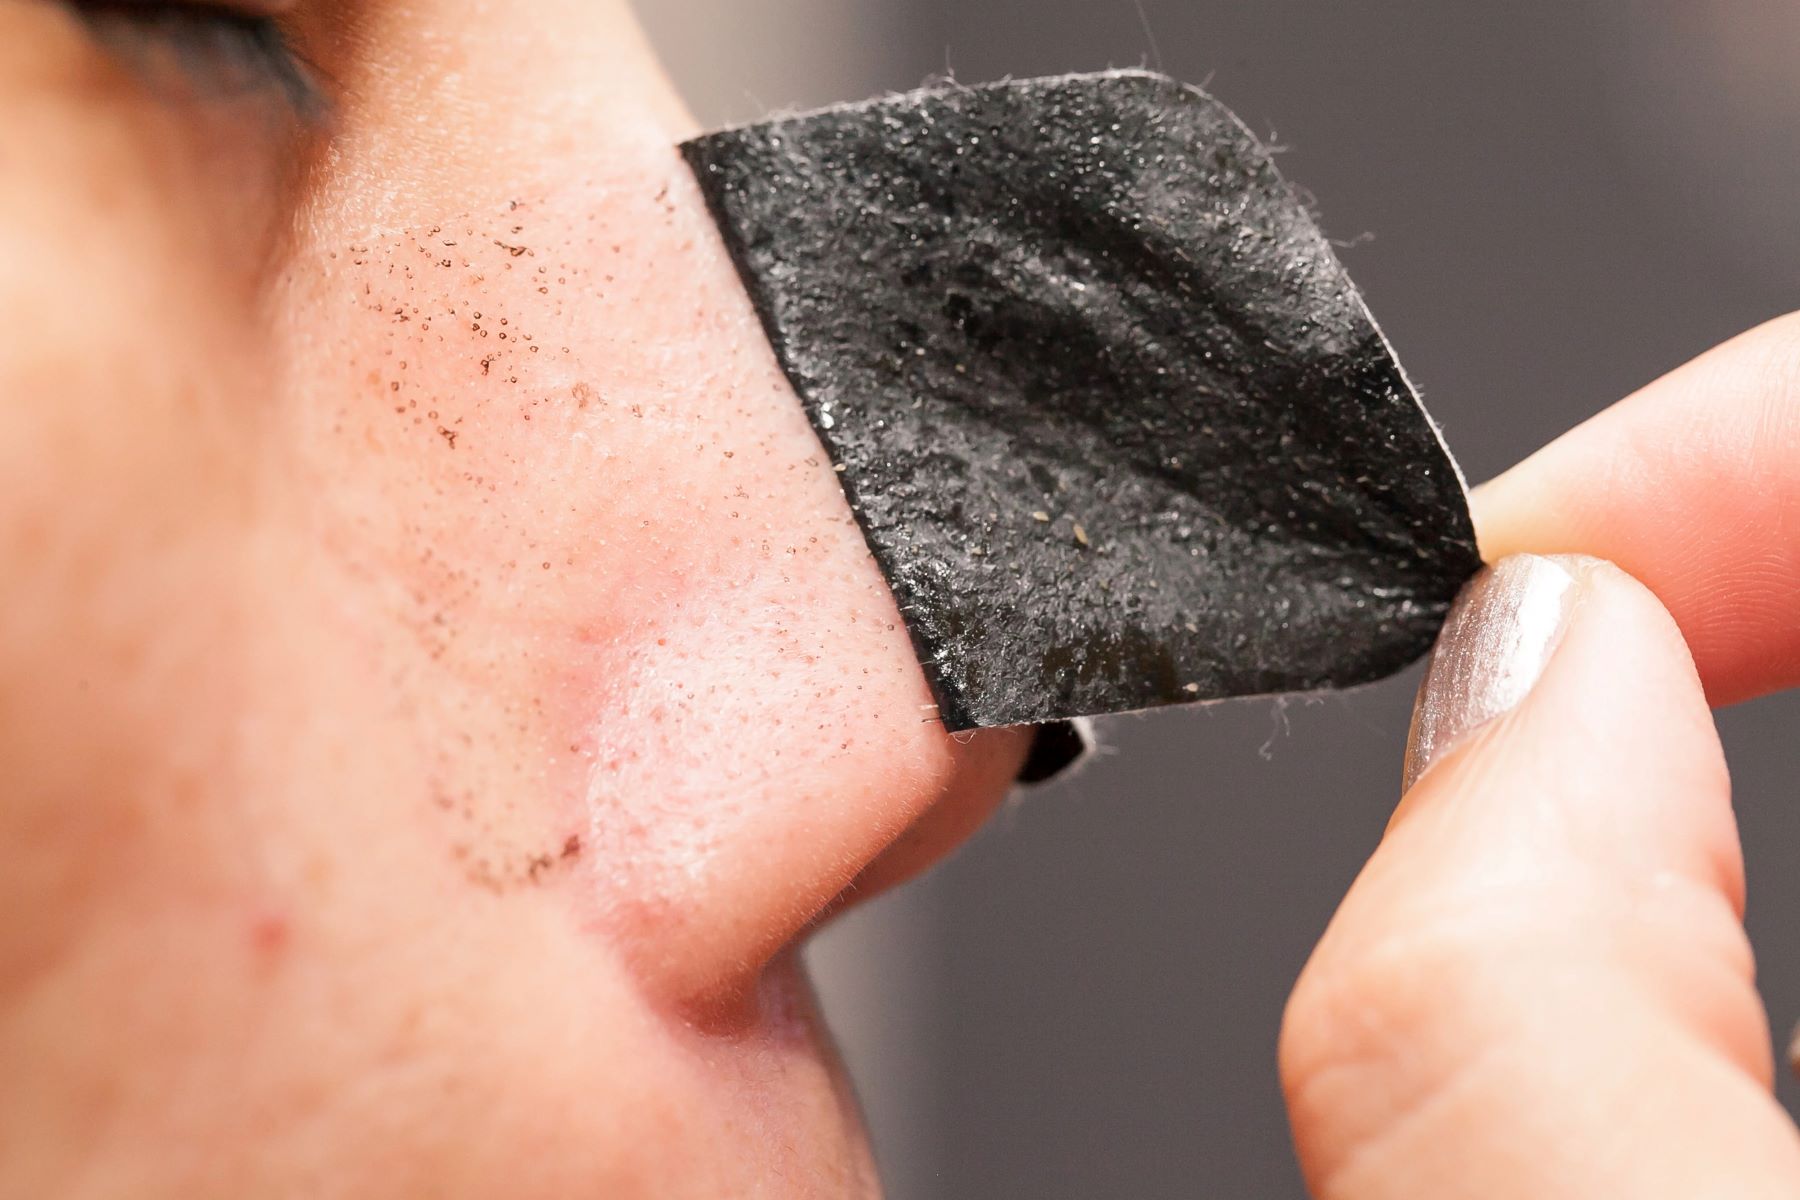 Shocking Video Reveals Enormous Blackhead Growth - You Won't Believe Your Eyes!